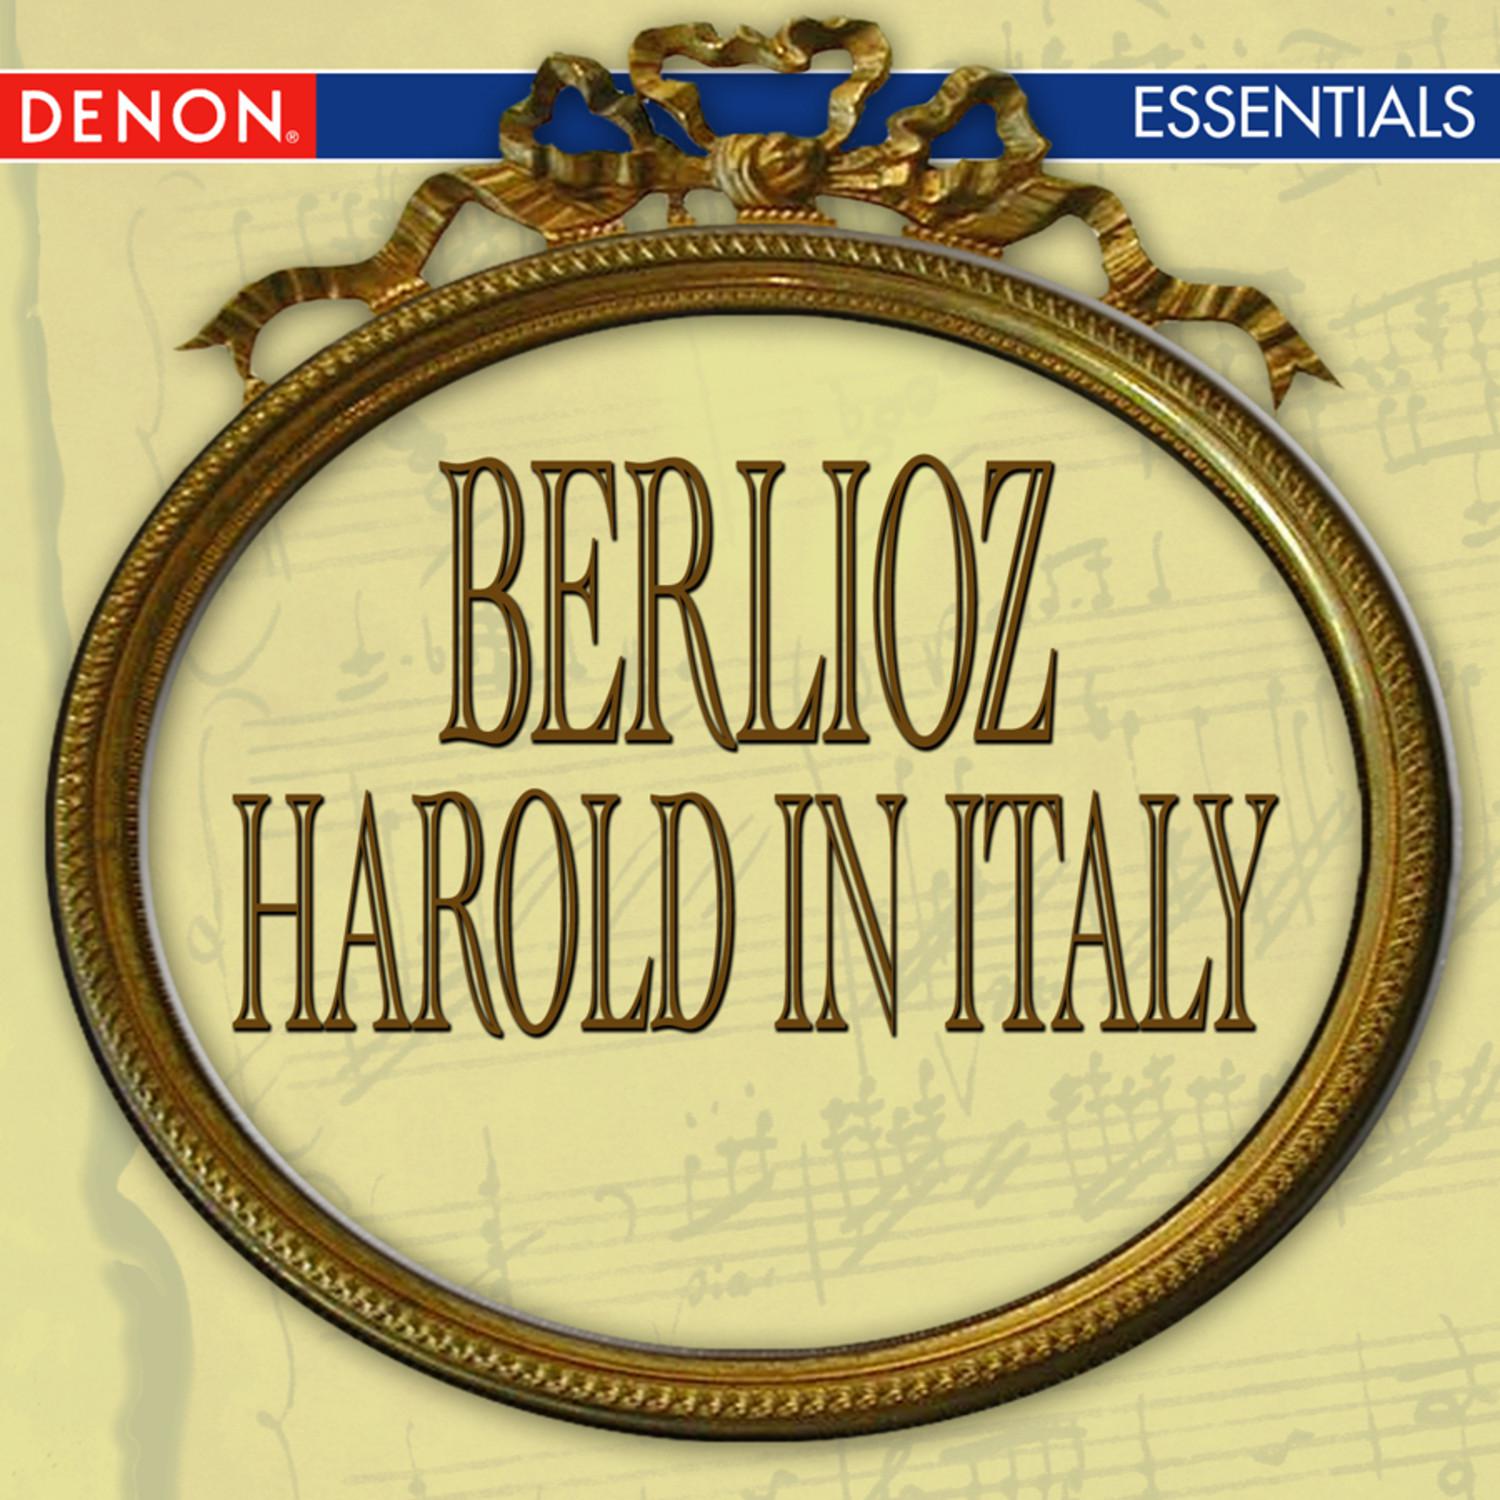 Harold in Italy Symphony for Viola & Orchestra in four Parts: III. Serenade of an Abruzzian Highlander - Allegro assai